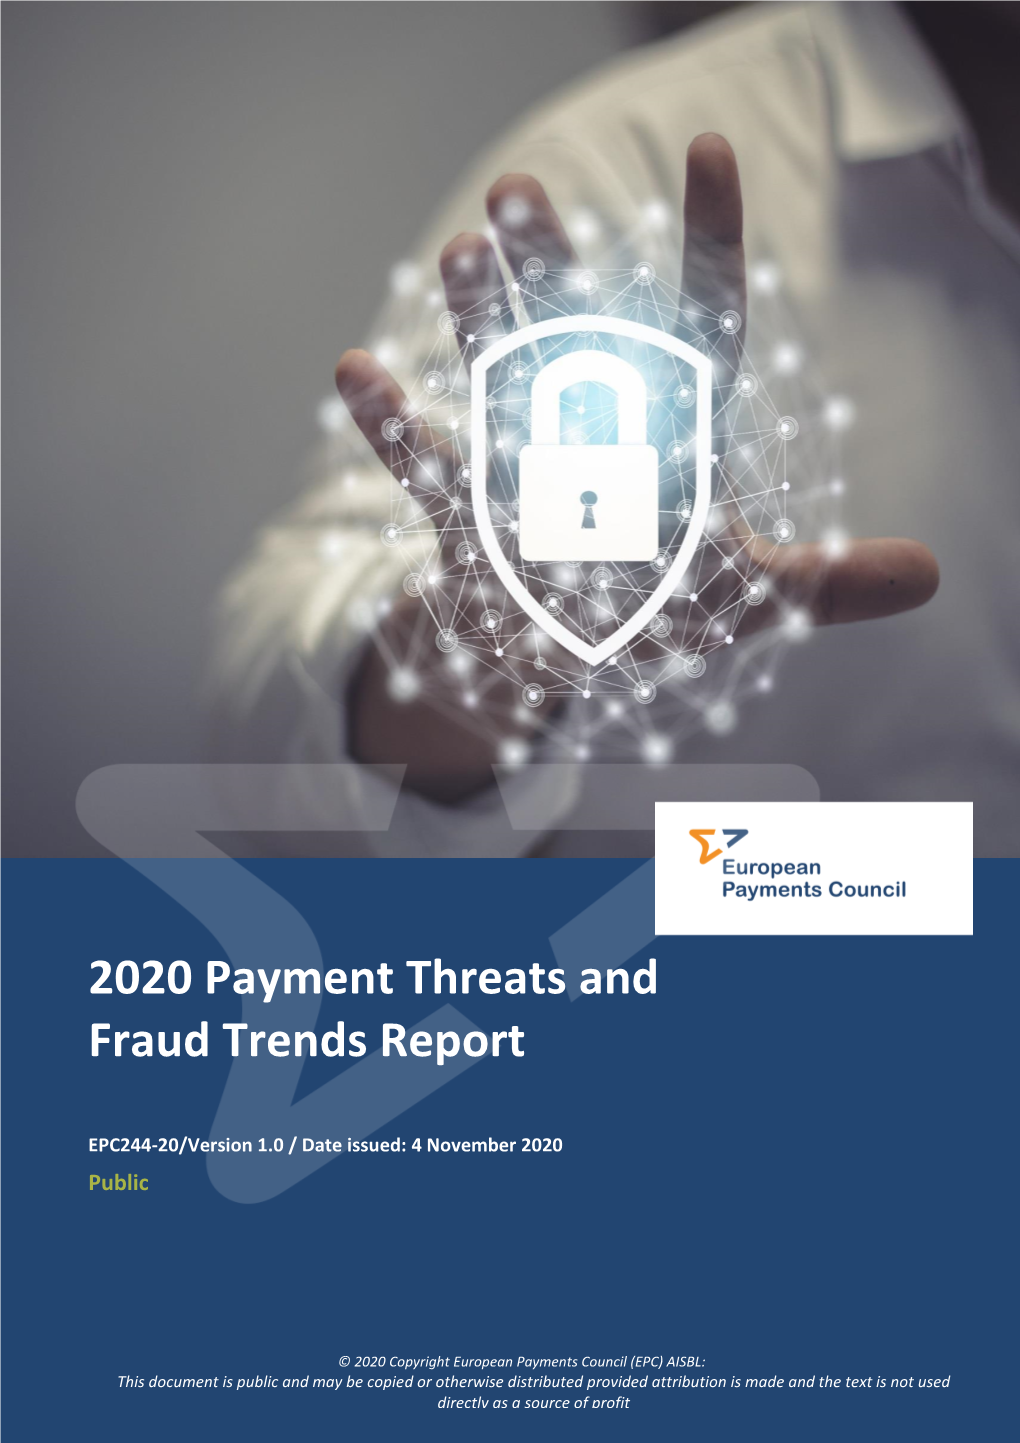 EPC244-20 V1.0 2020 Payments Threats and Fraud Trends Report